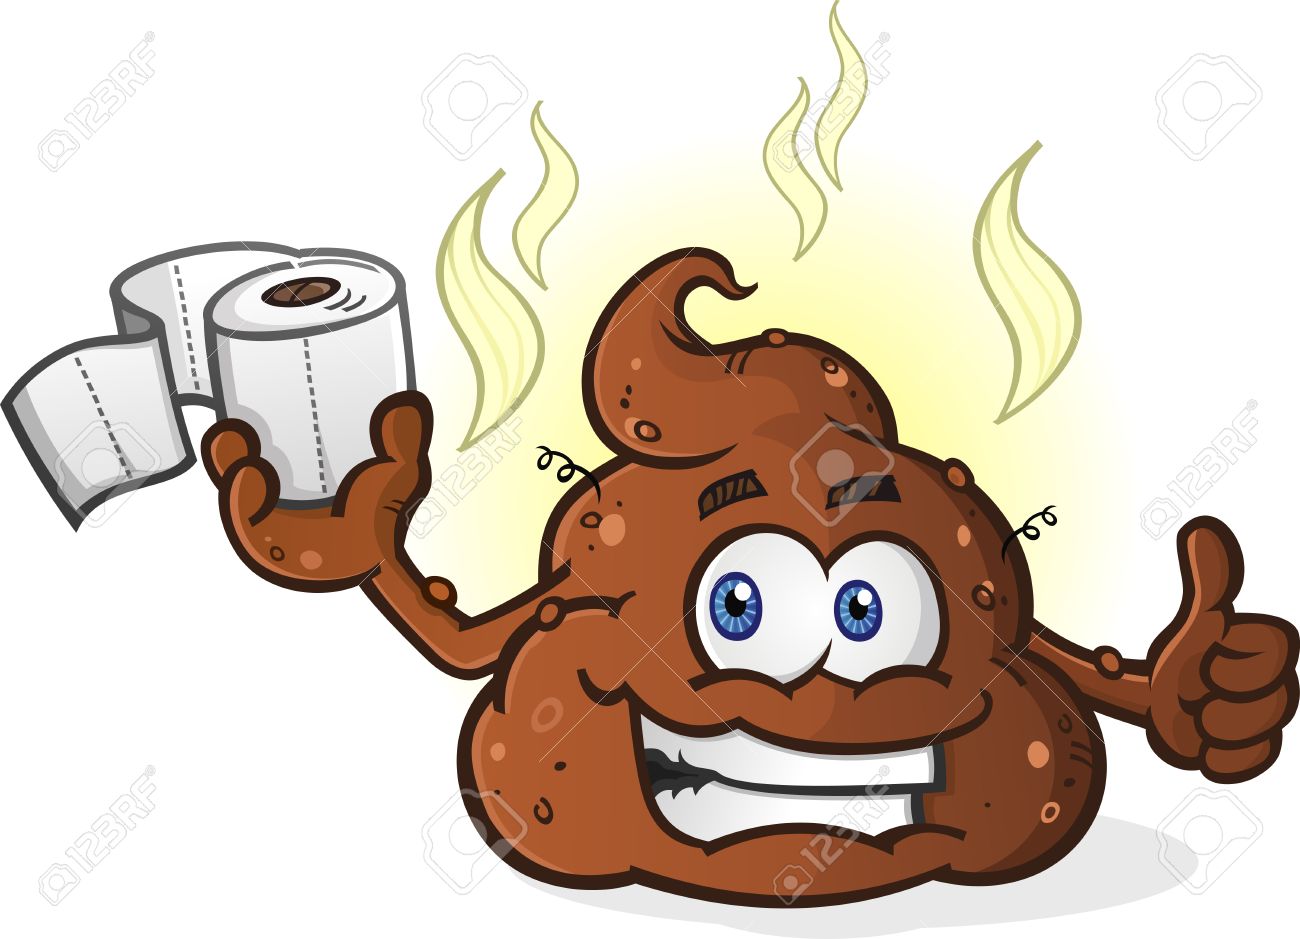 60897643-smiling-pile-of-poop-cartoon-character-holding-toilet-paper-and-giving-a-thumbs-up.jpg